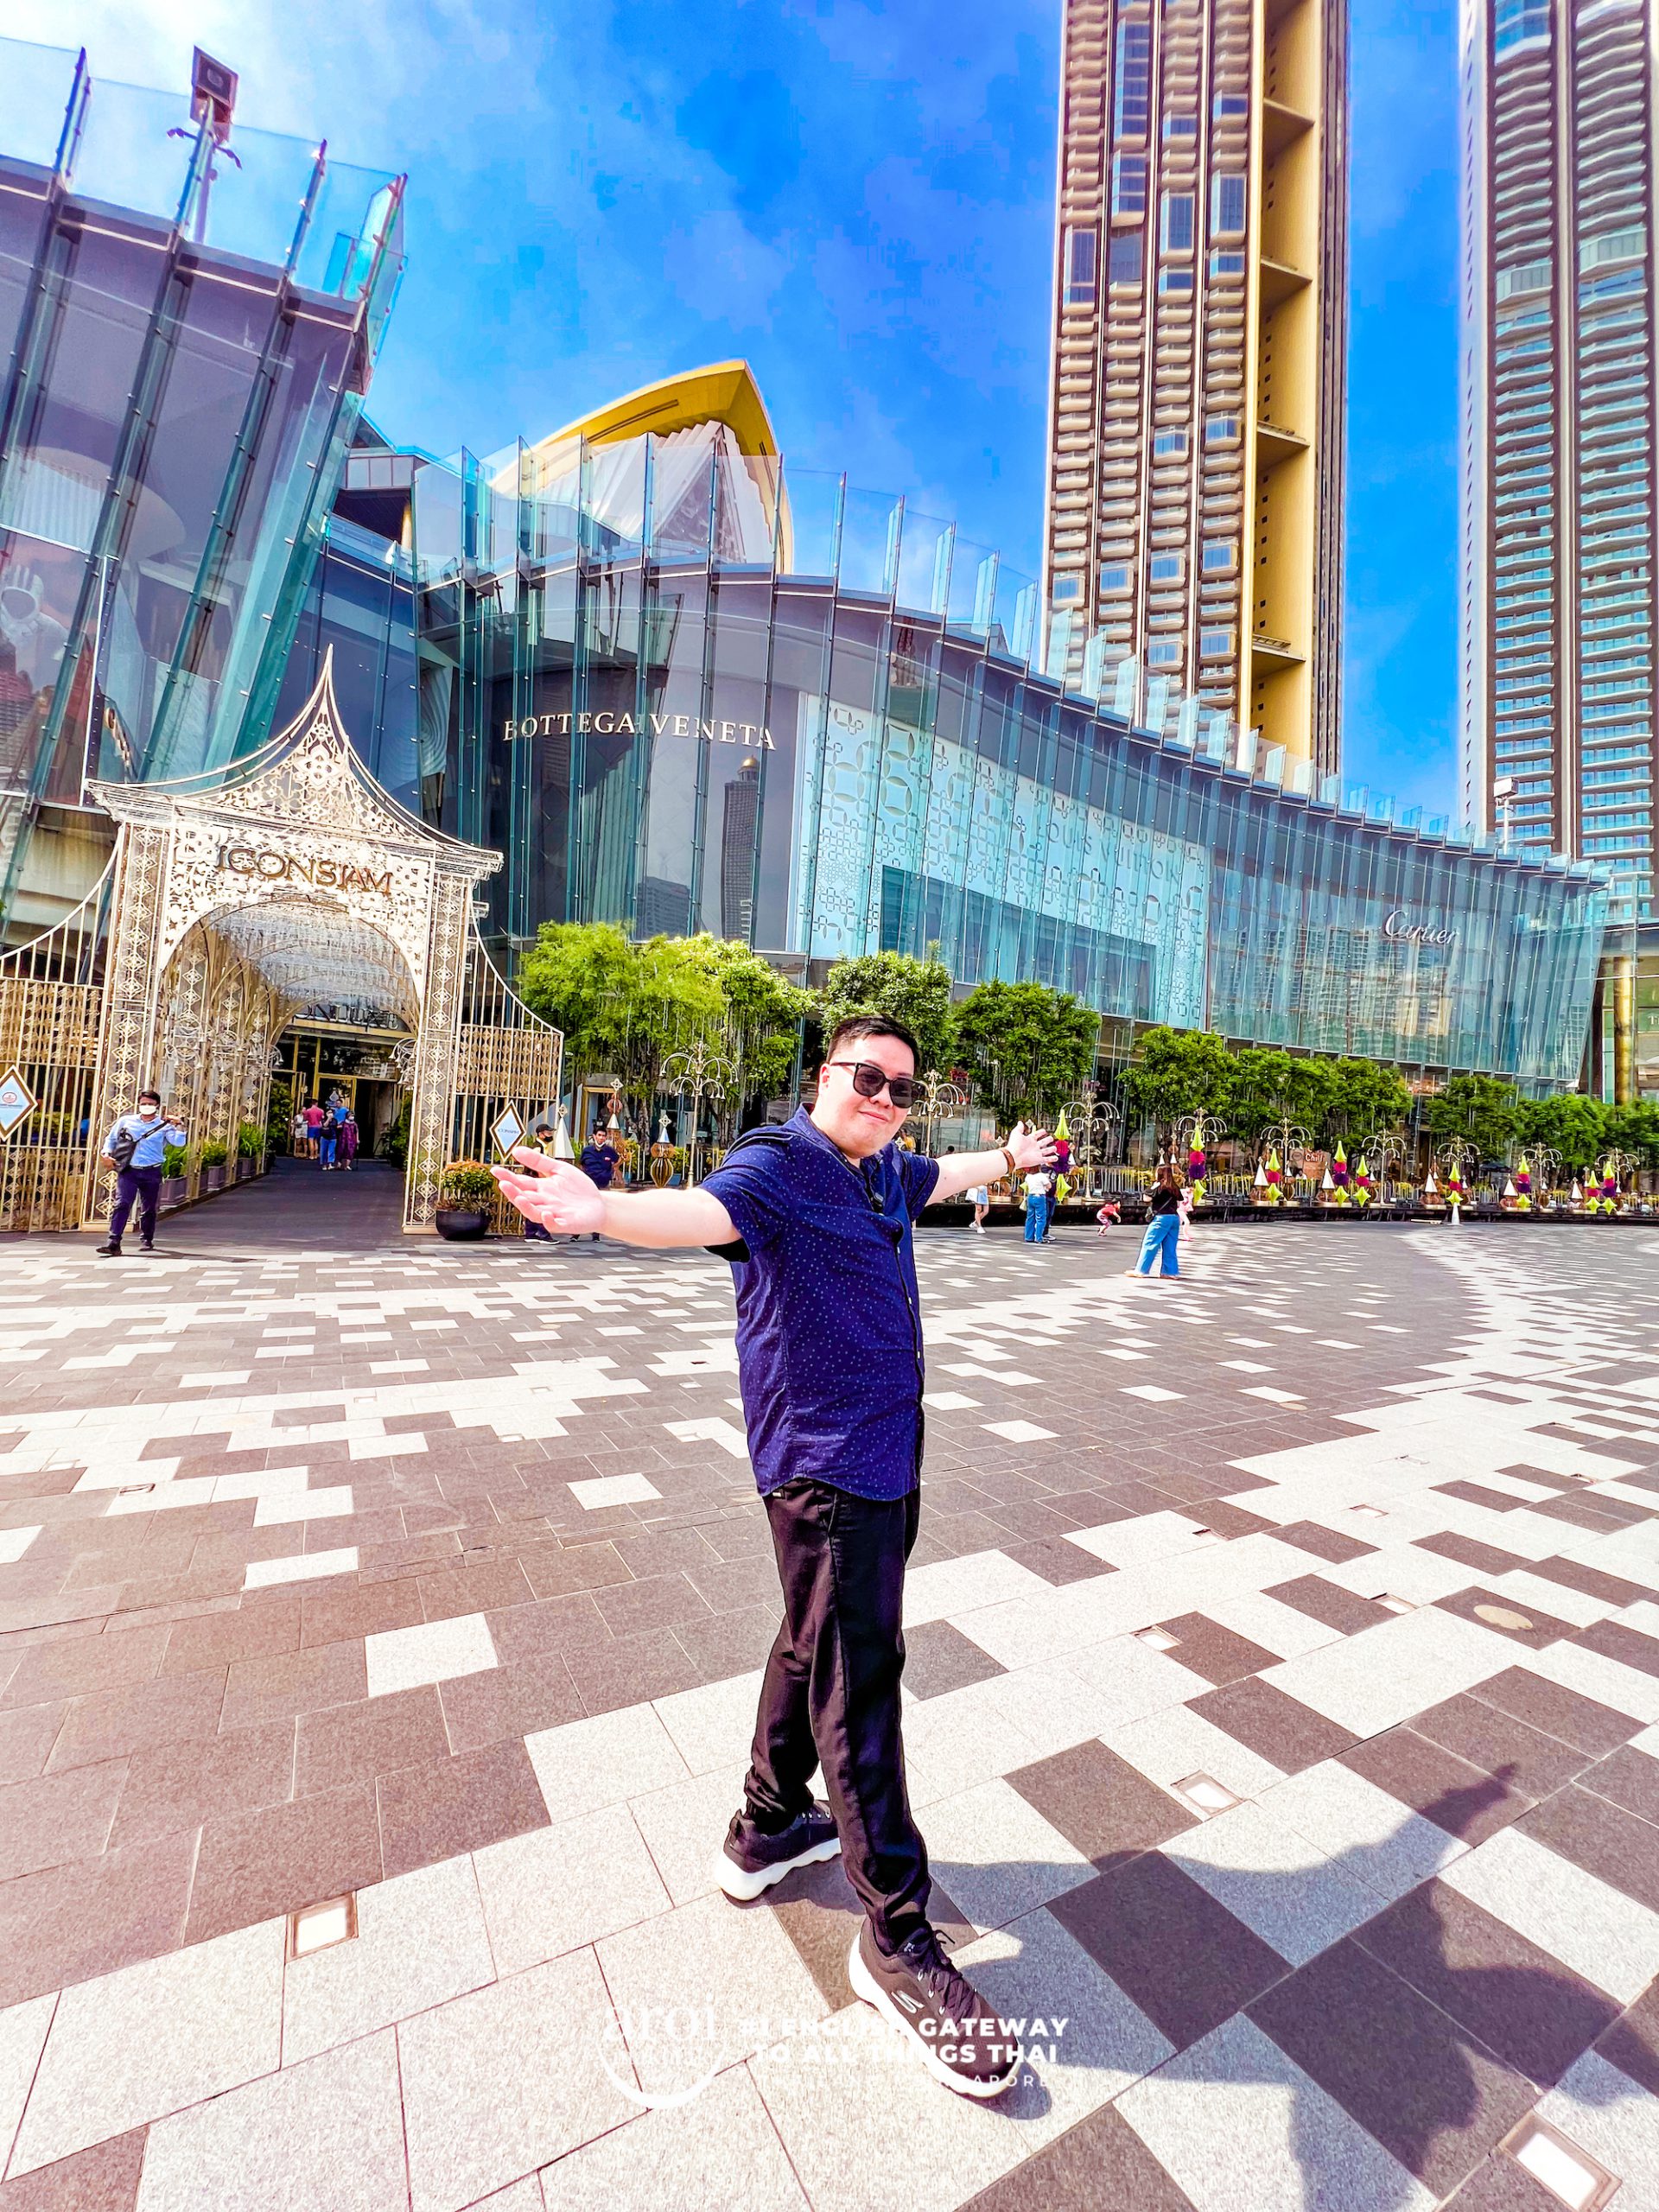 wilber_iconsiam